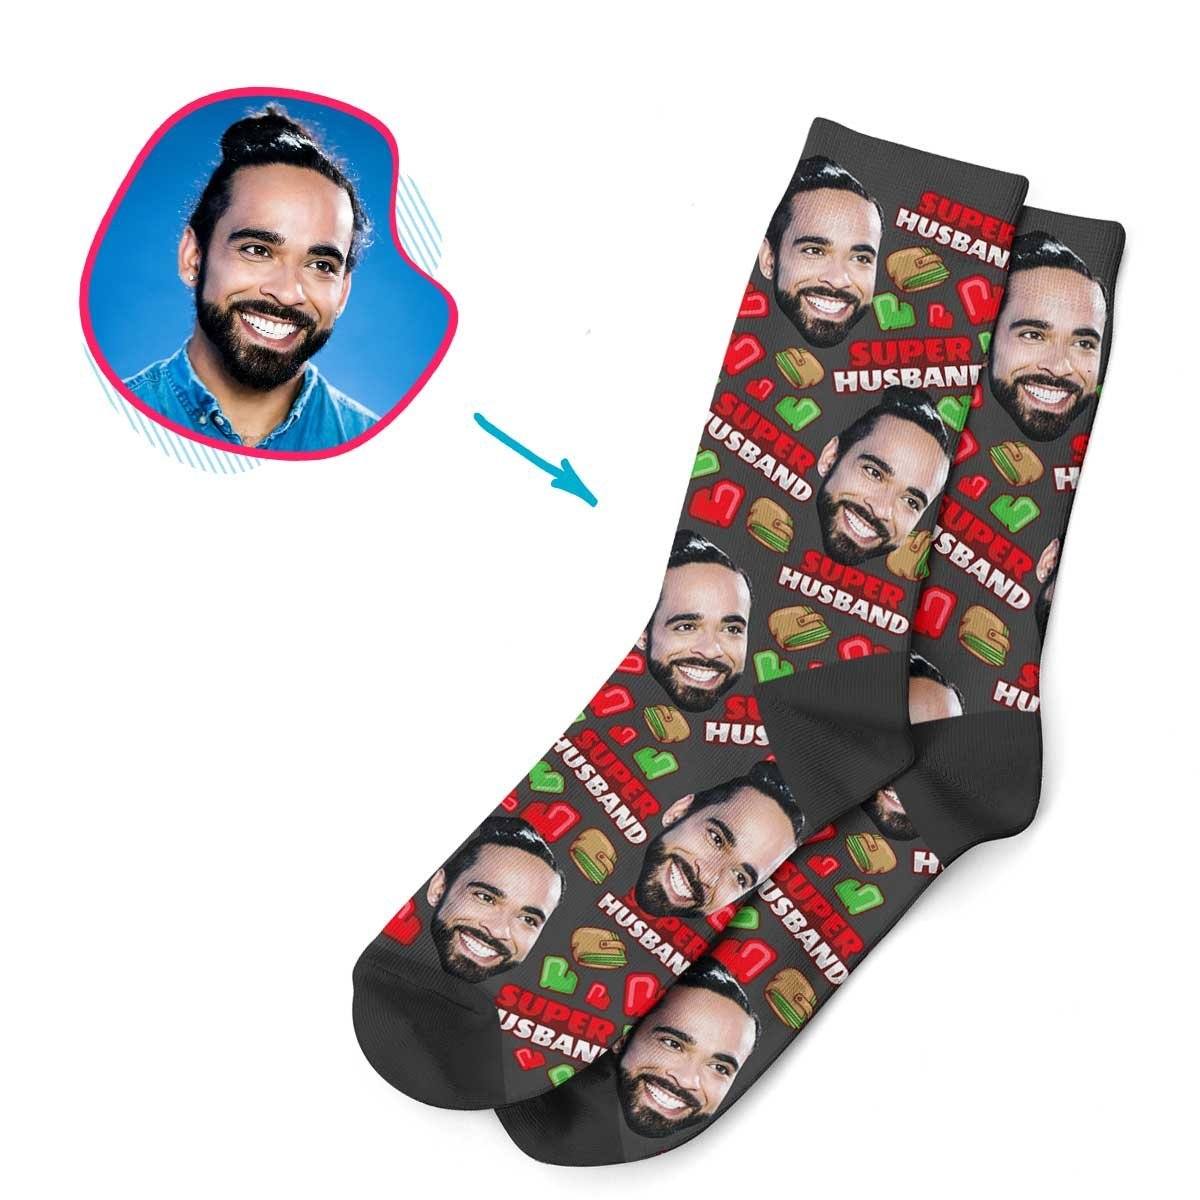 Dark Husband personalized socks with photo of face printed on them